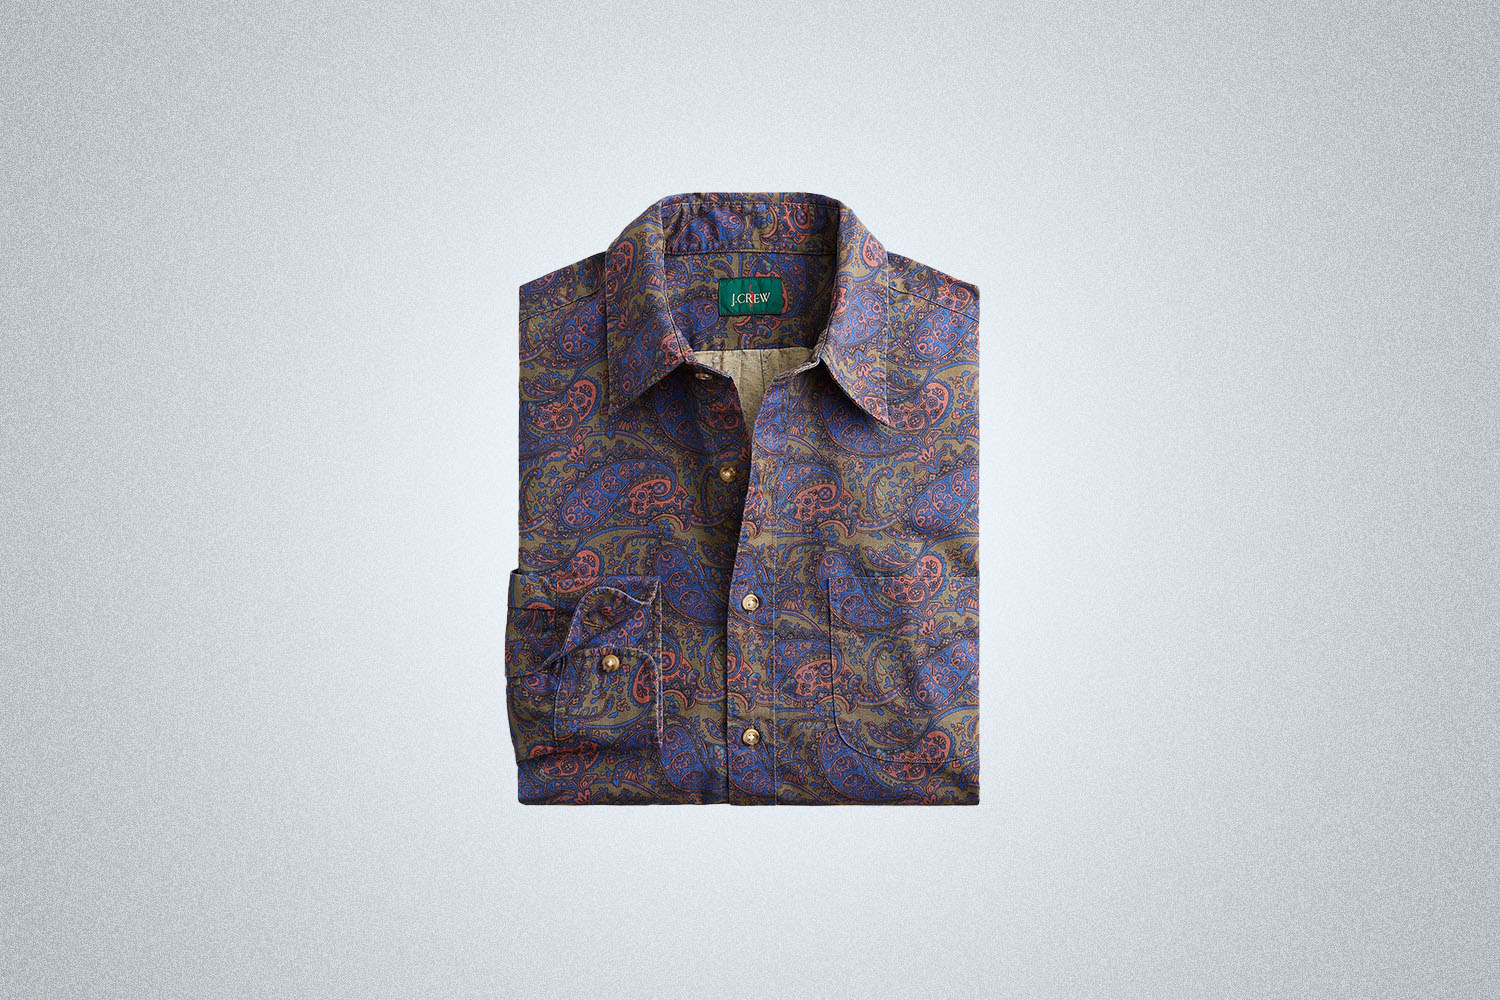 The J.Crew Vintage twill shirt in print on a gray background